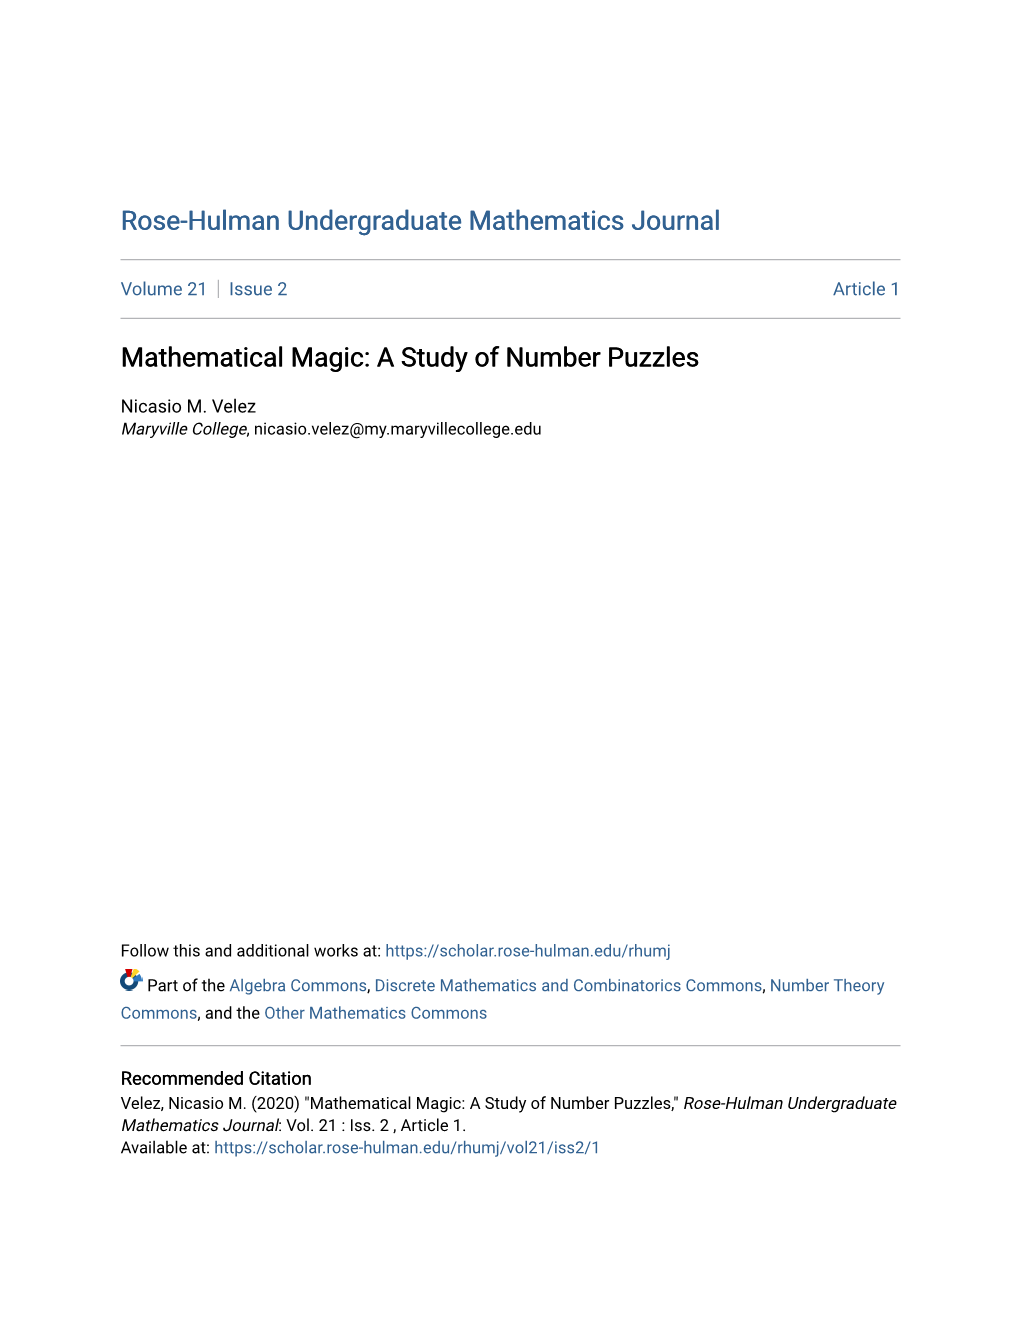 Mathematical Magic: a Study of Number Puzzles